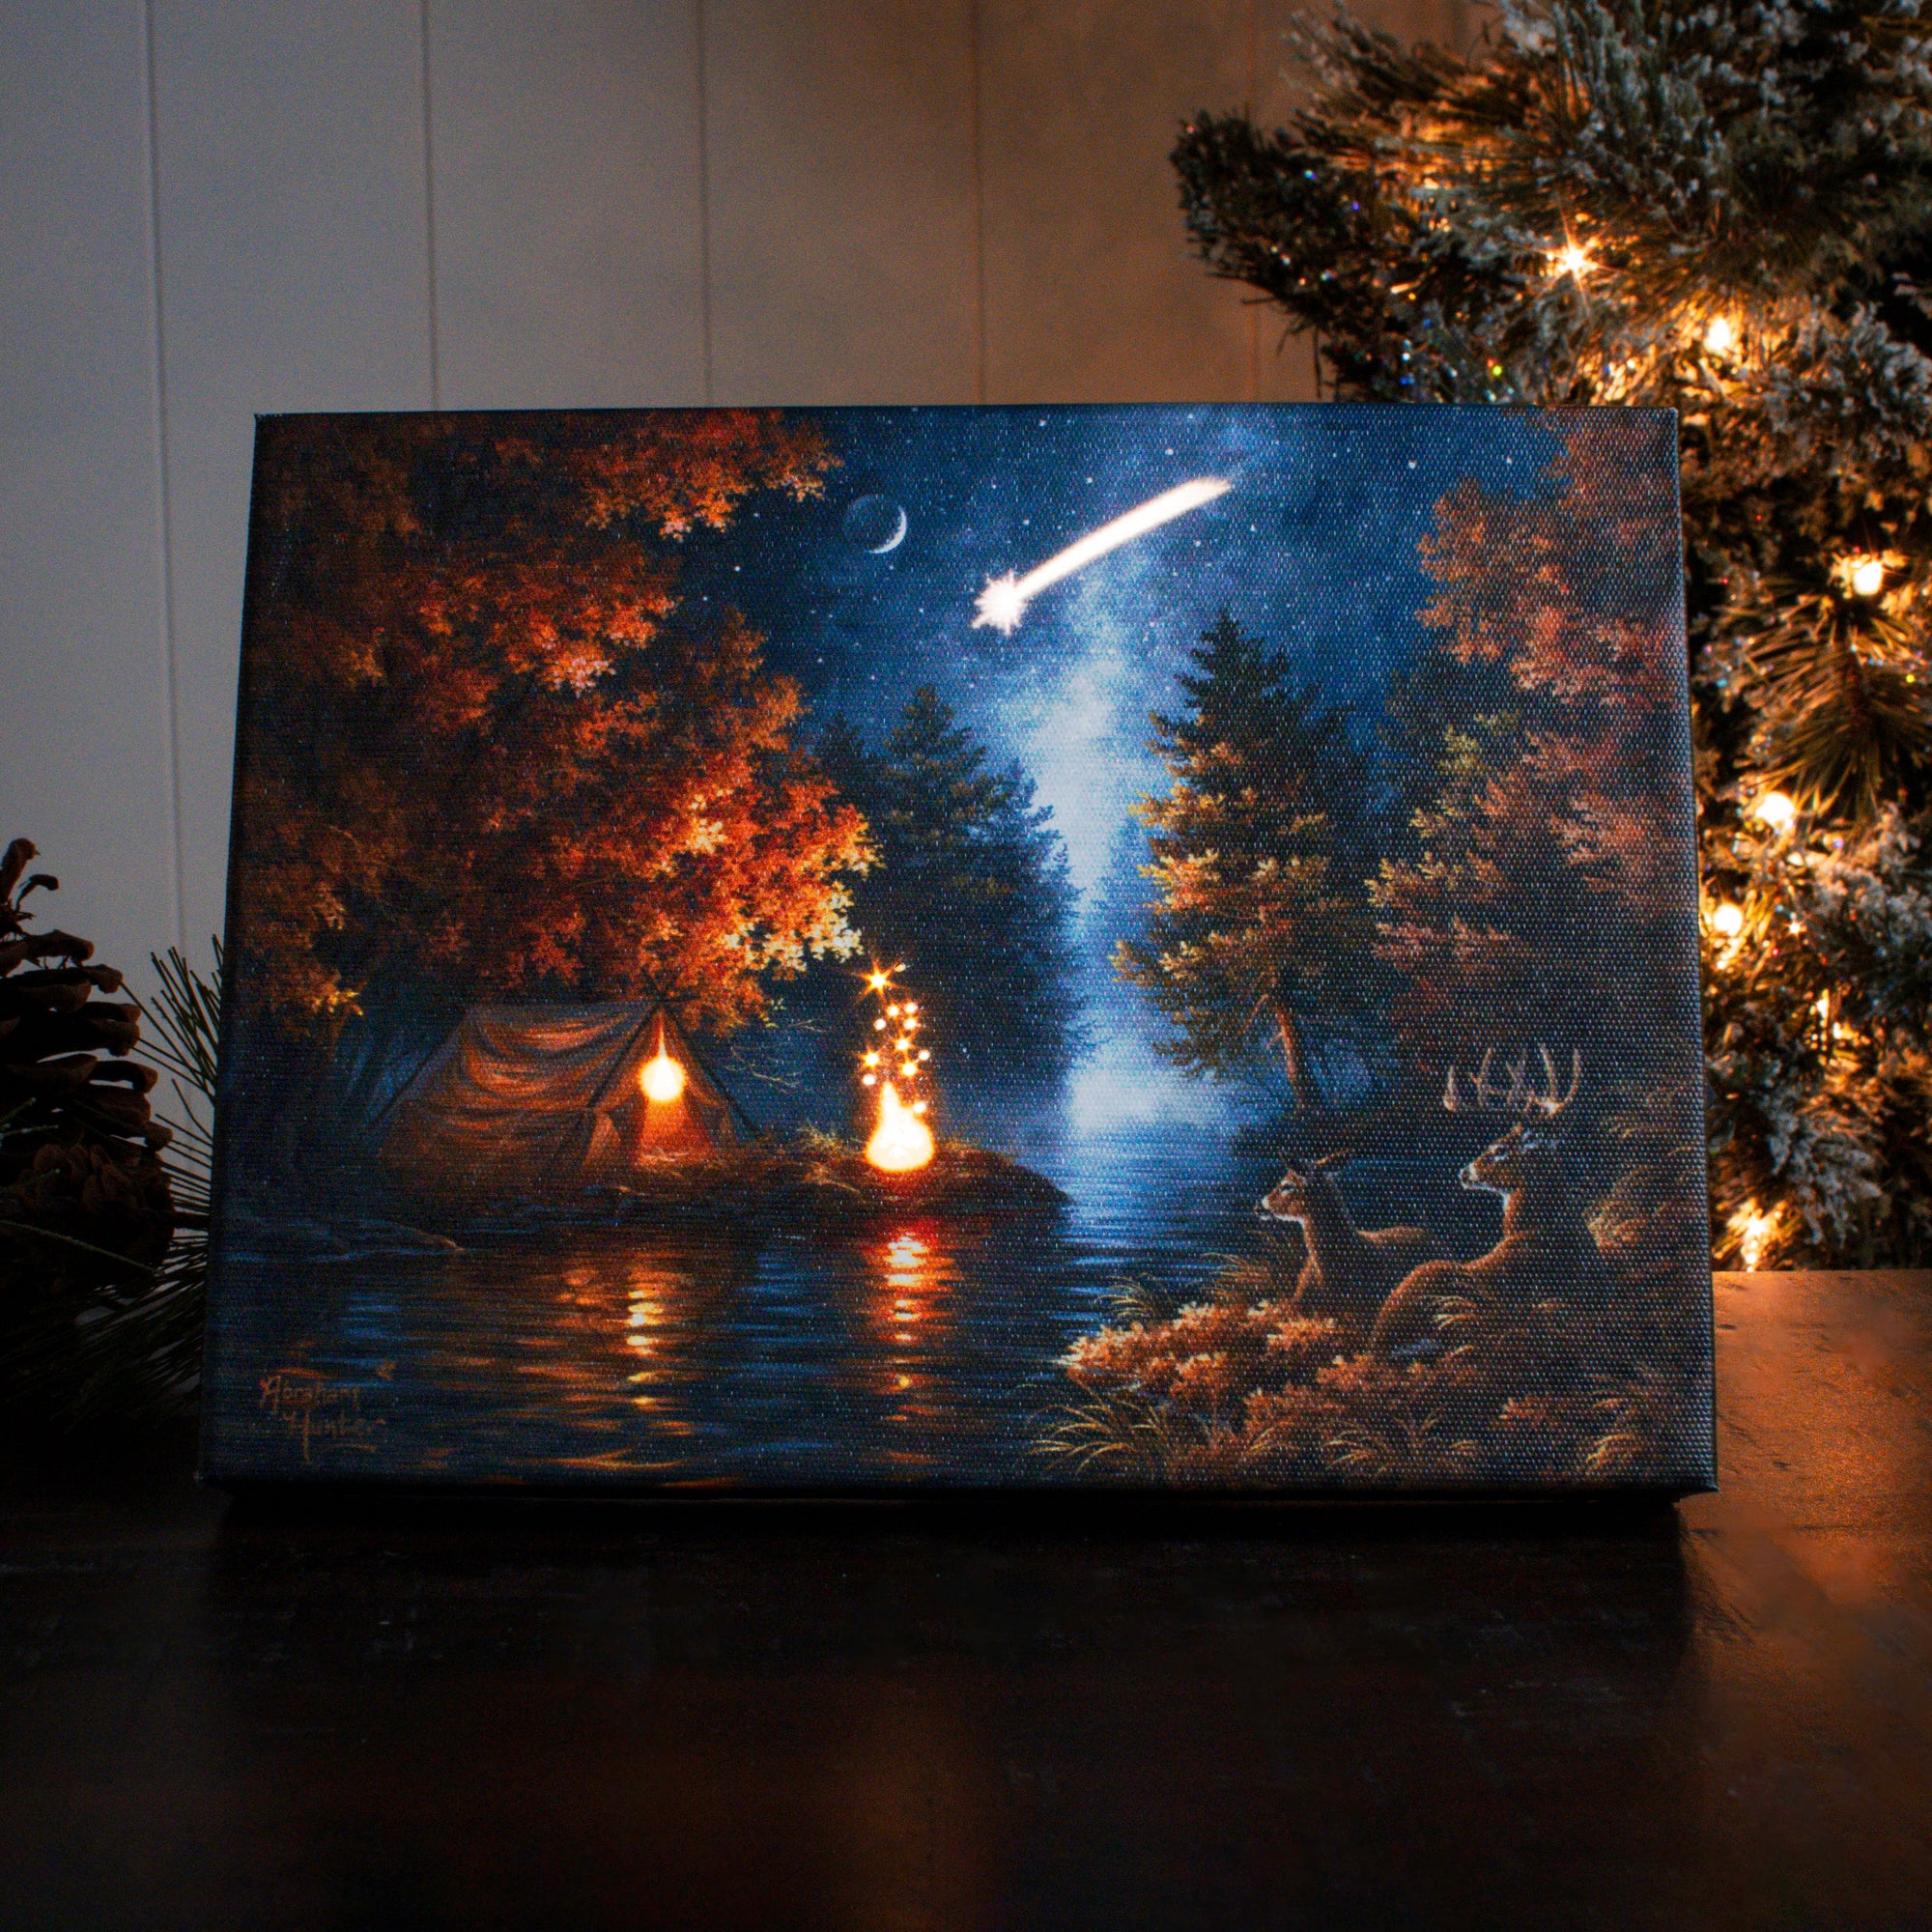 Wishing Upon a Star 8x6 Lighted Tabletop Canvas